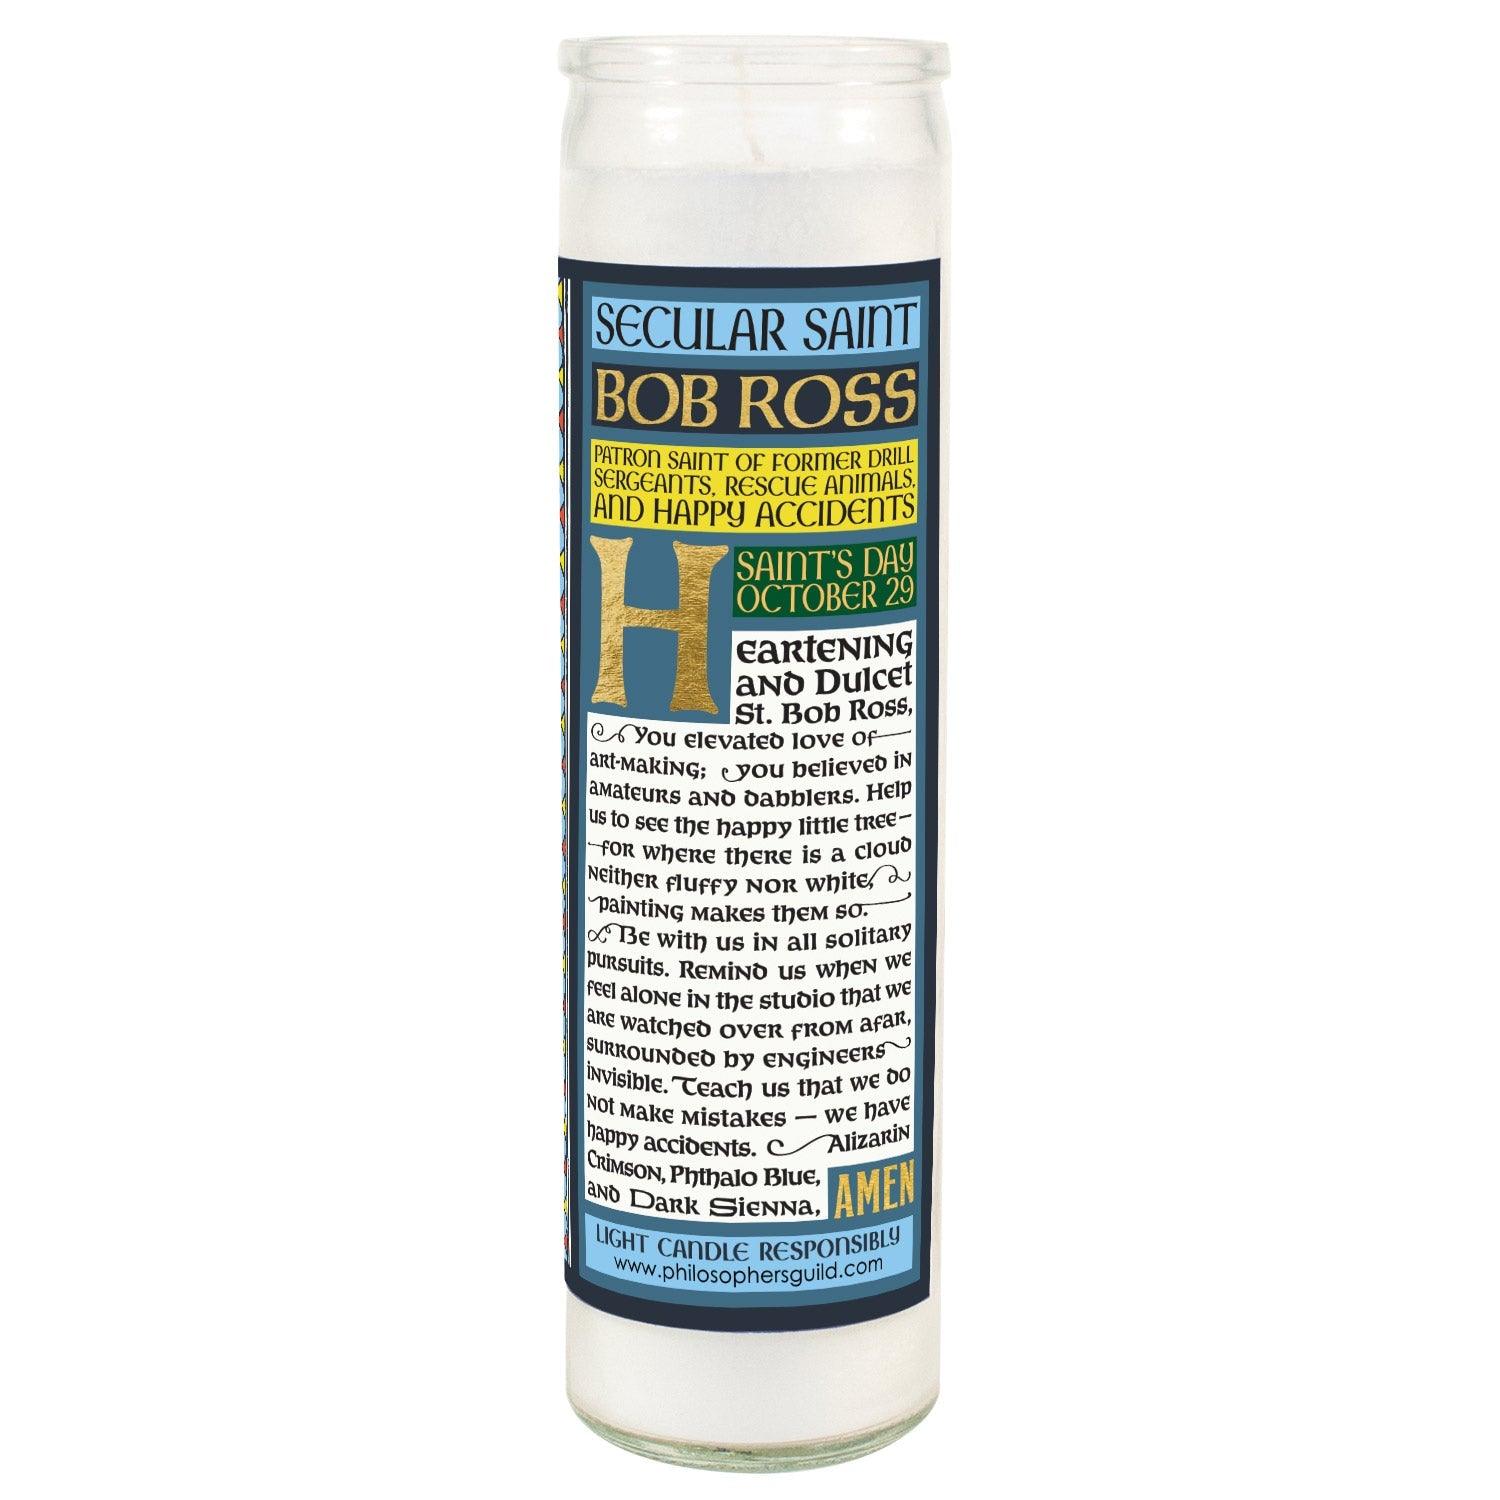 Product photo of Bob Ross Secular Saint Candle, a novelty gift manufactured by The Unemployed Philosophers Guild.